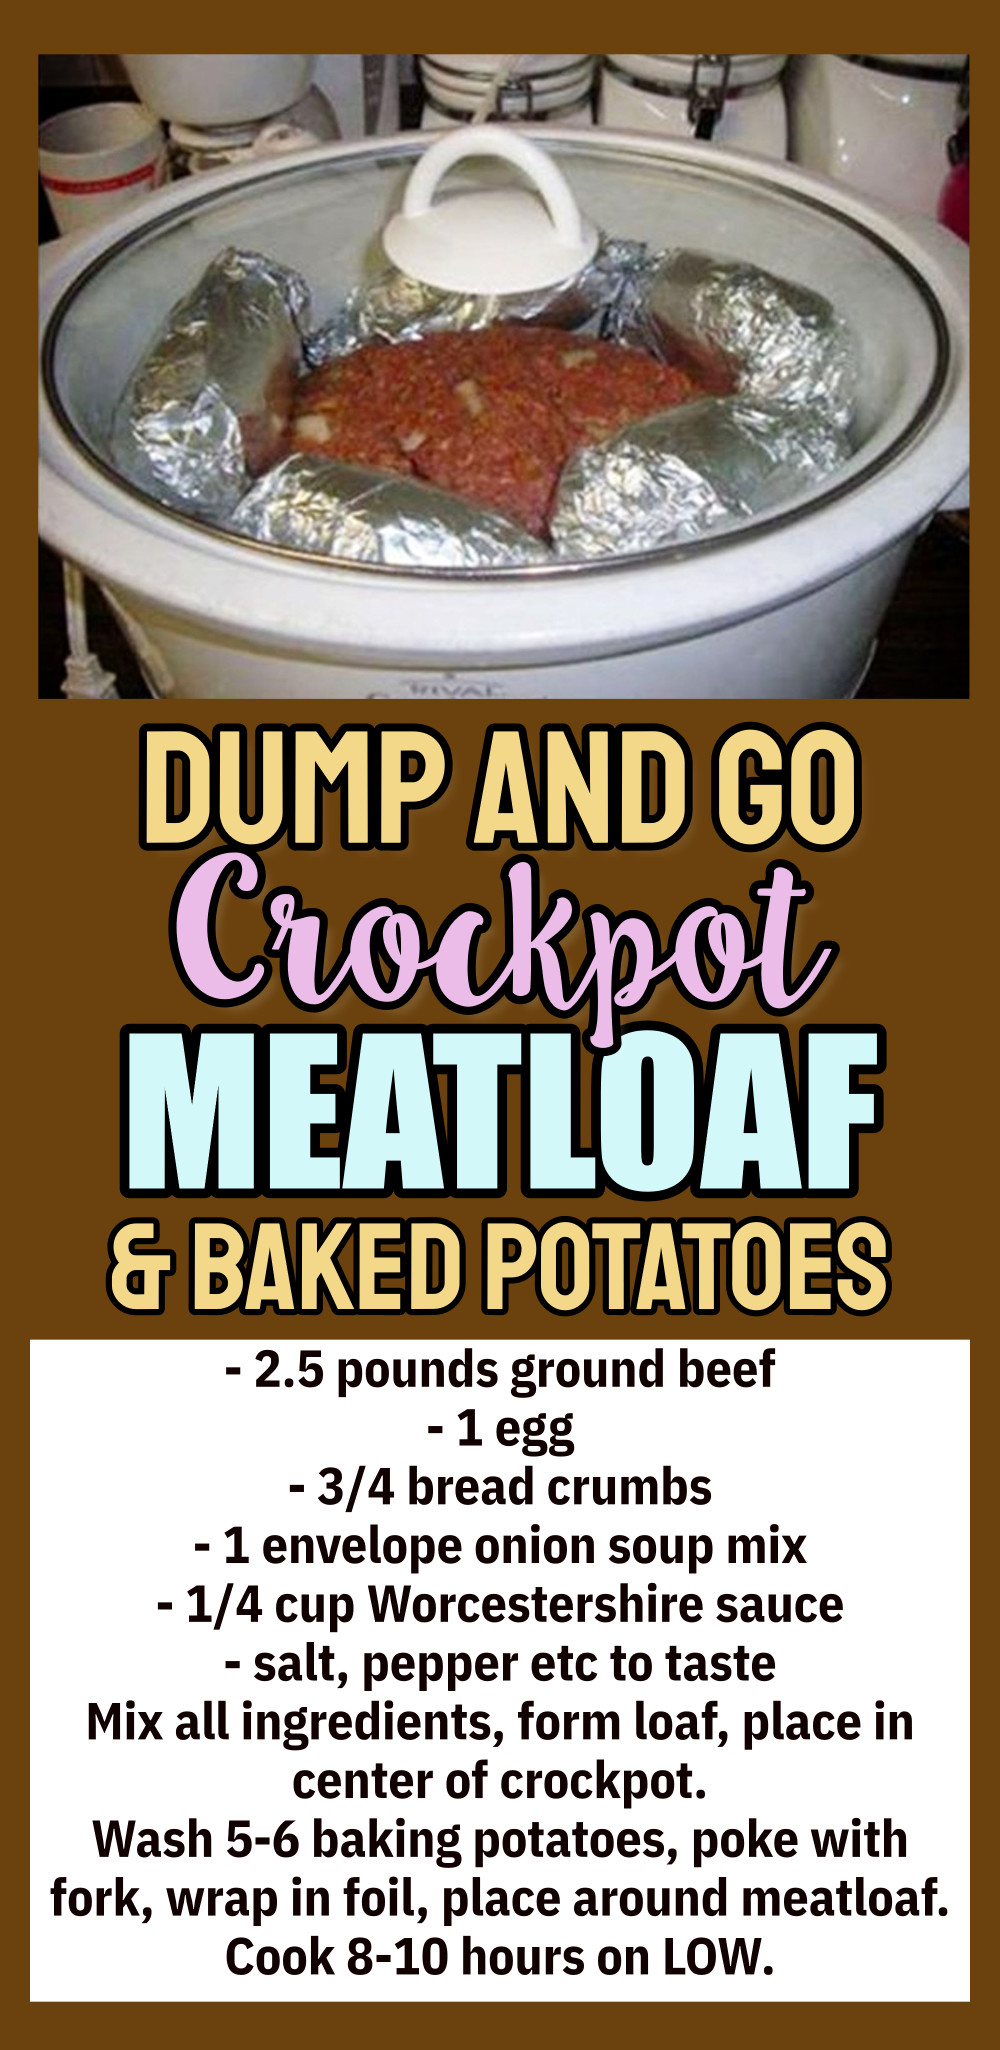 Crockpot Meatloaf and Baked Potatoes